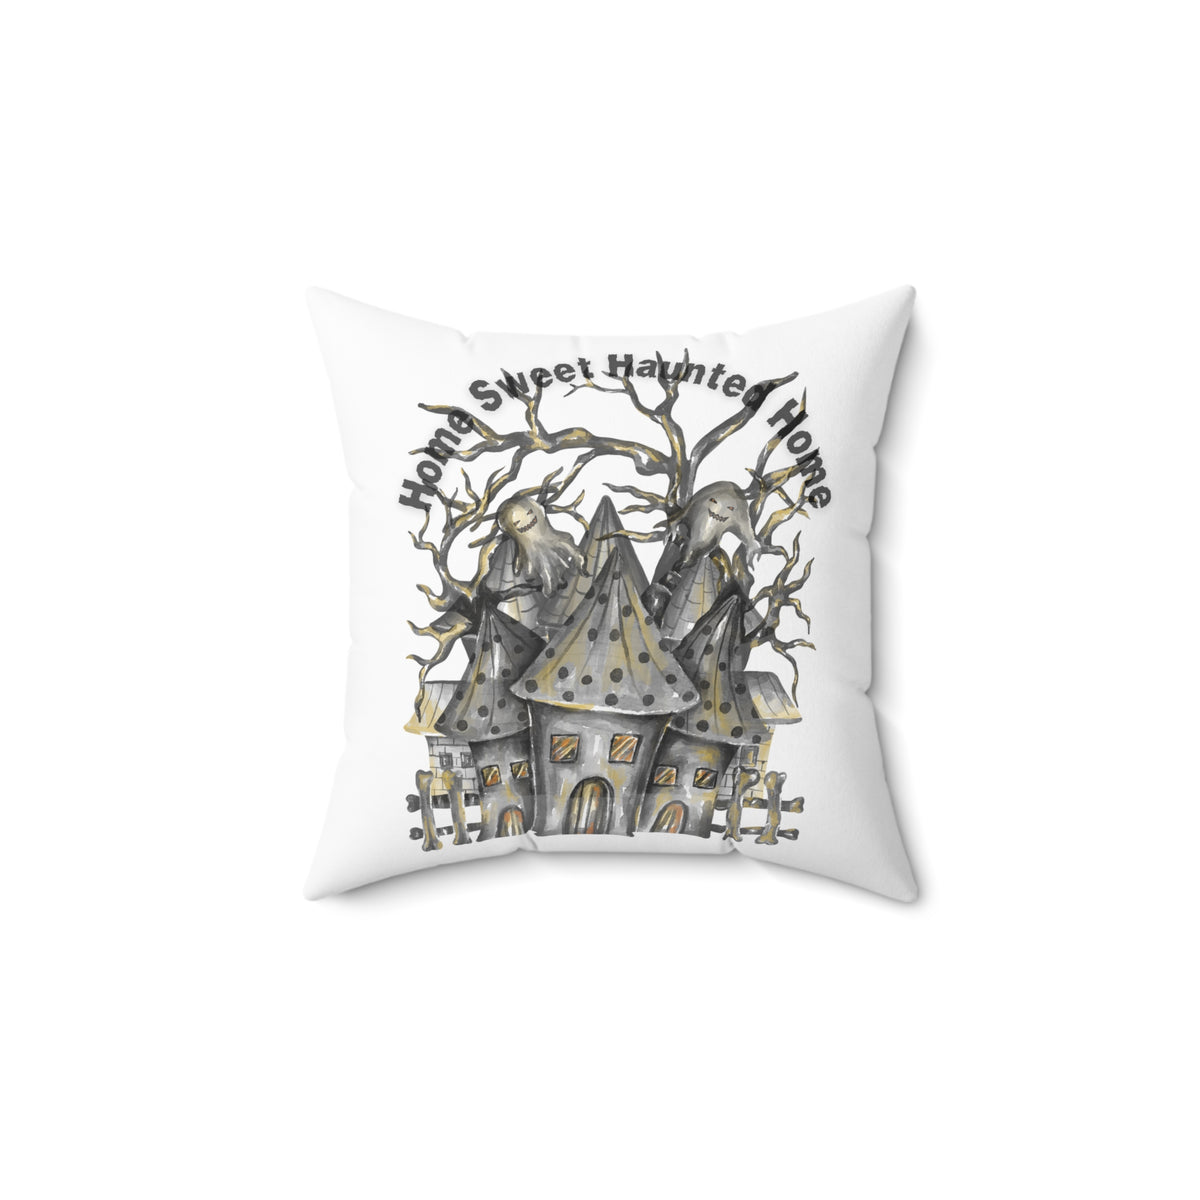 Home Sweet Haunted Home Spun Polyester Square Pillow.